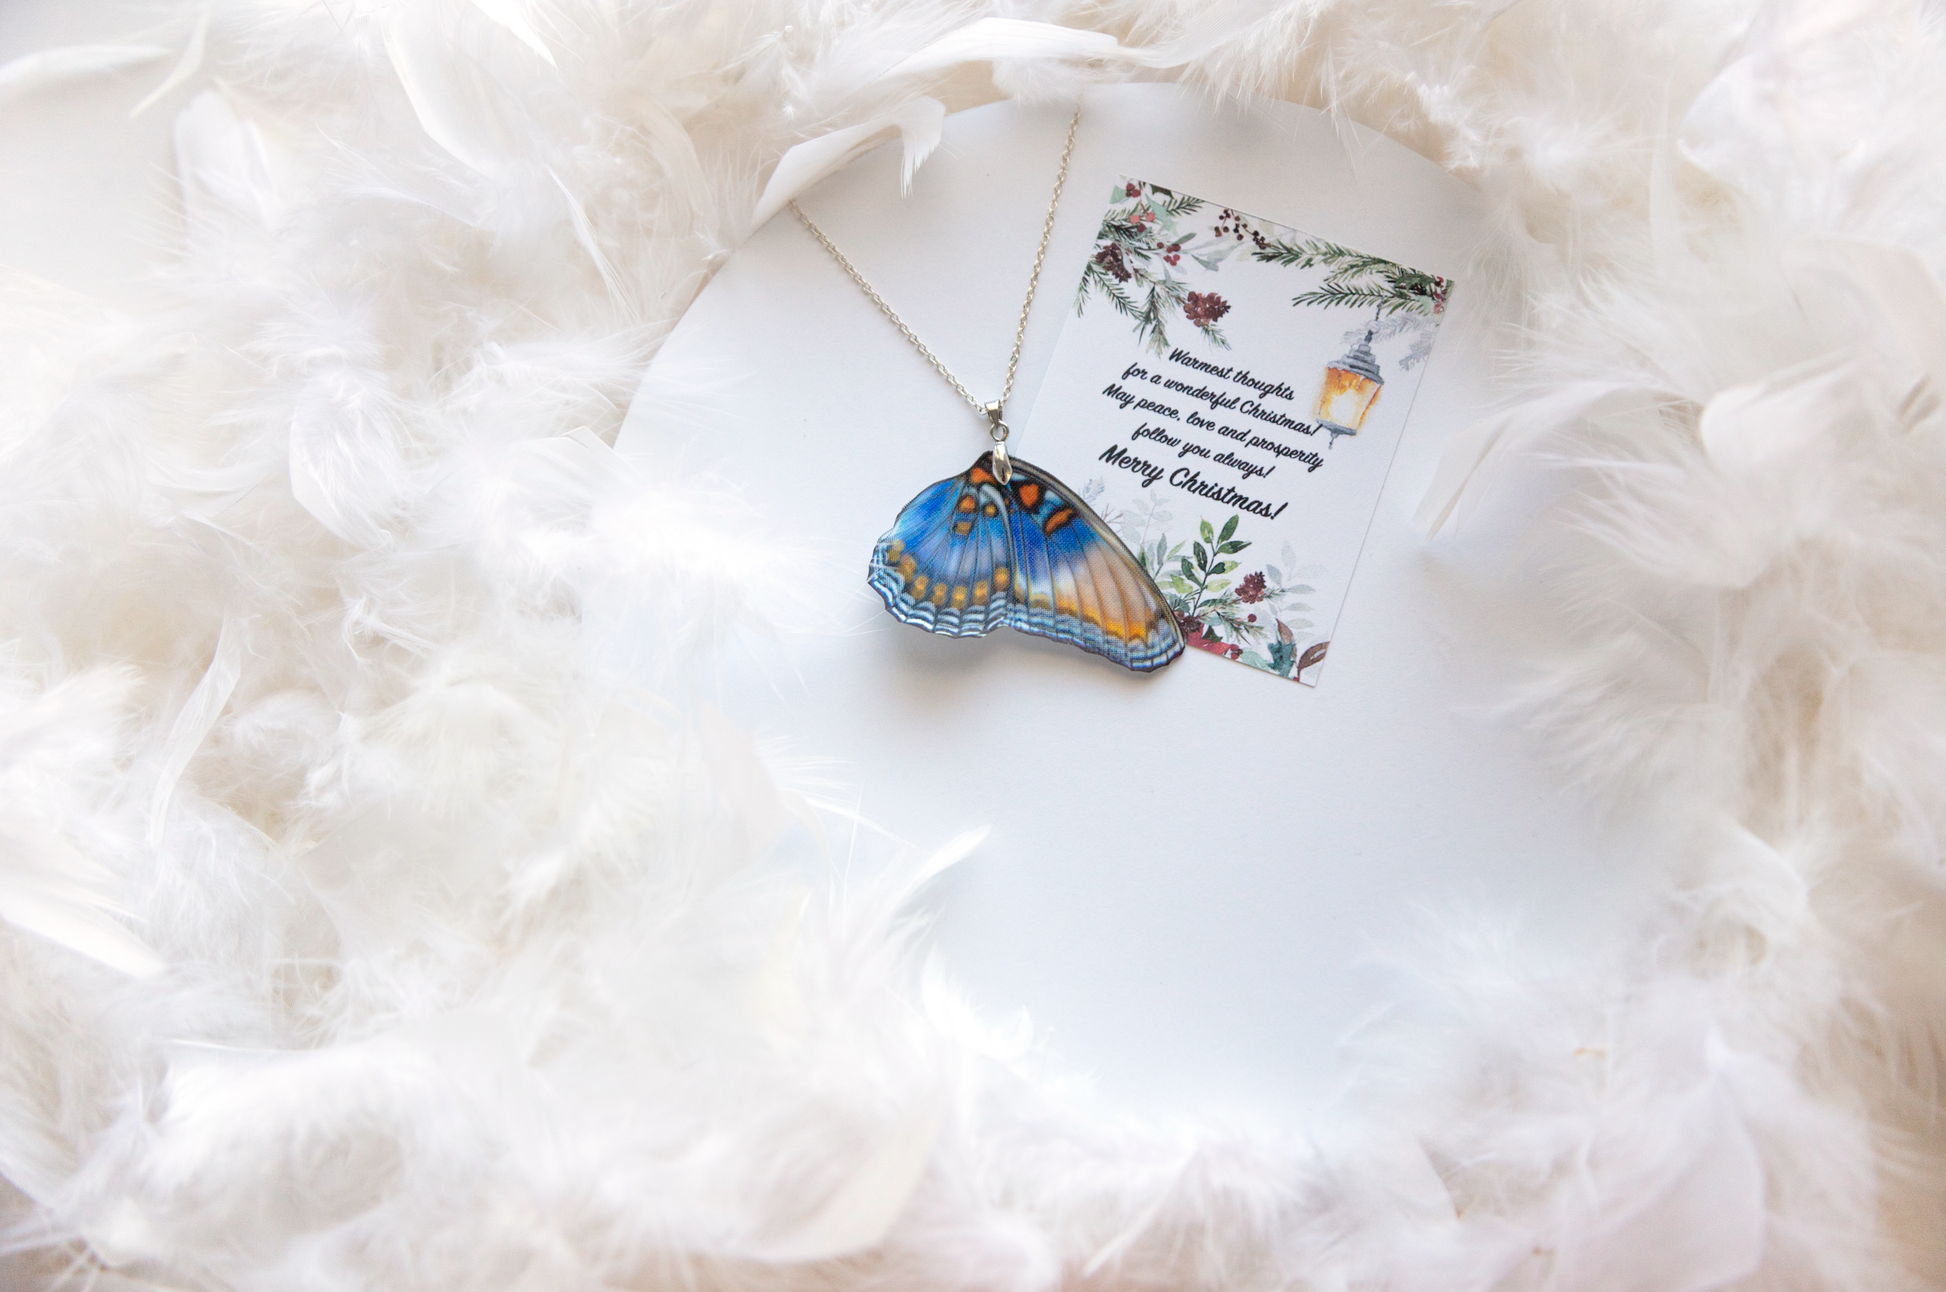 blue swallowtail butterfly wing pendant necklace